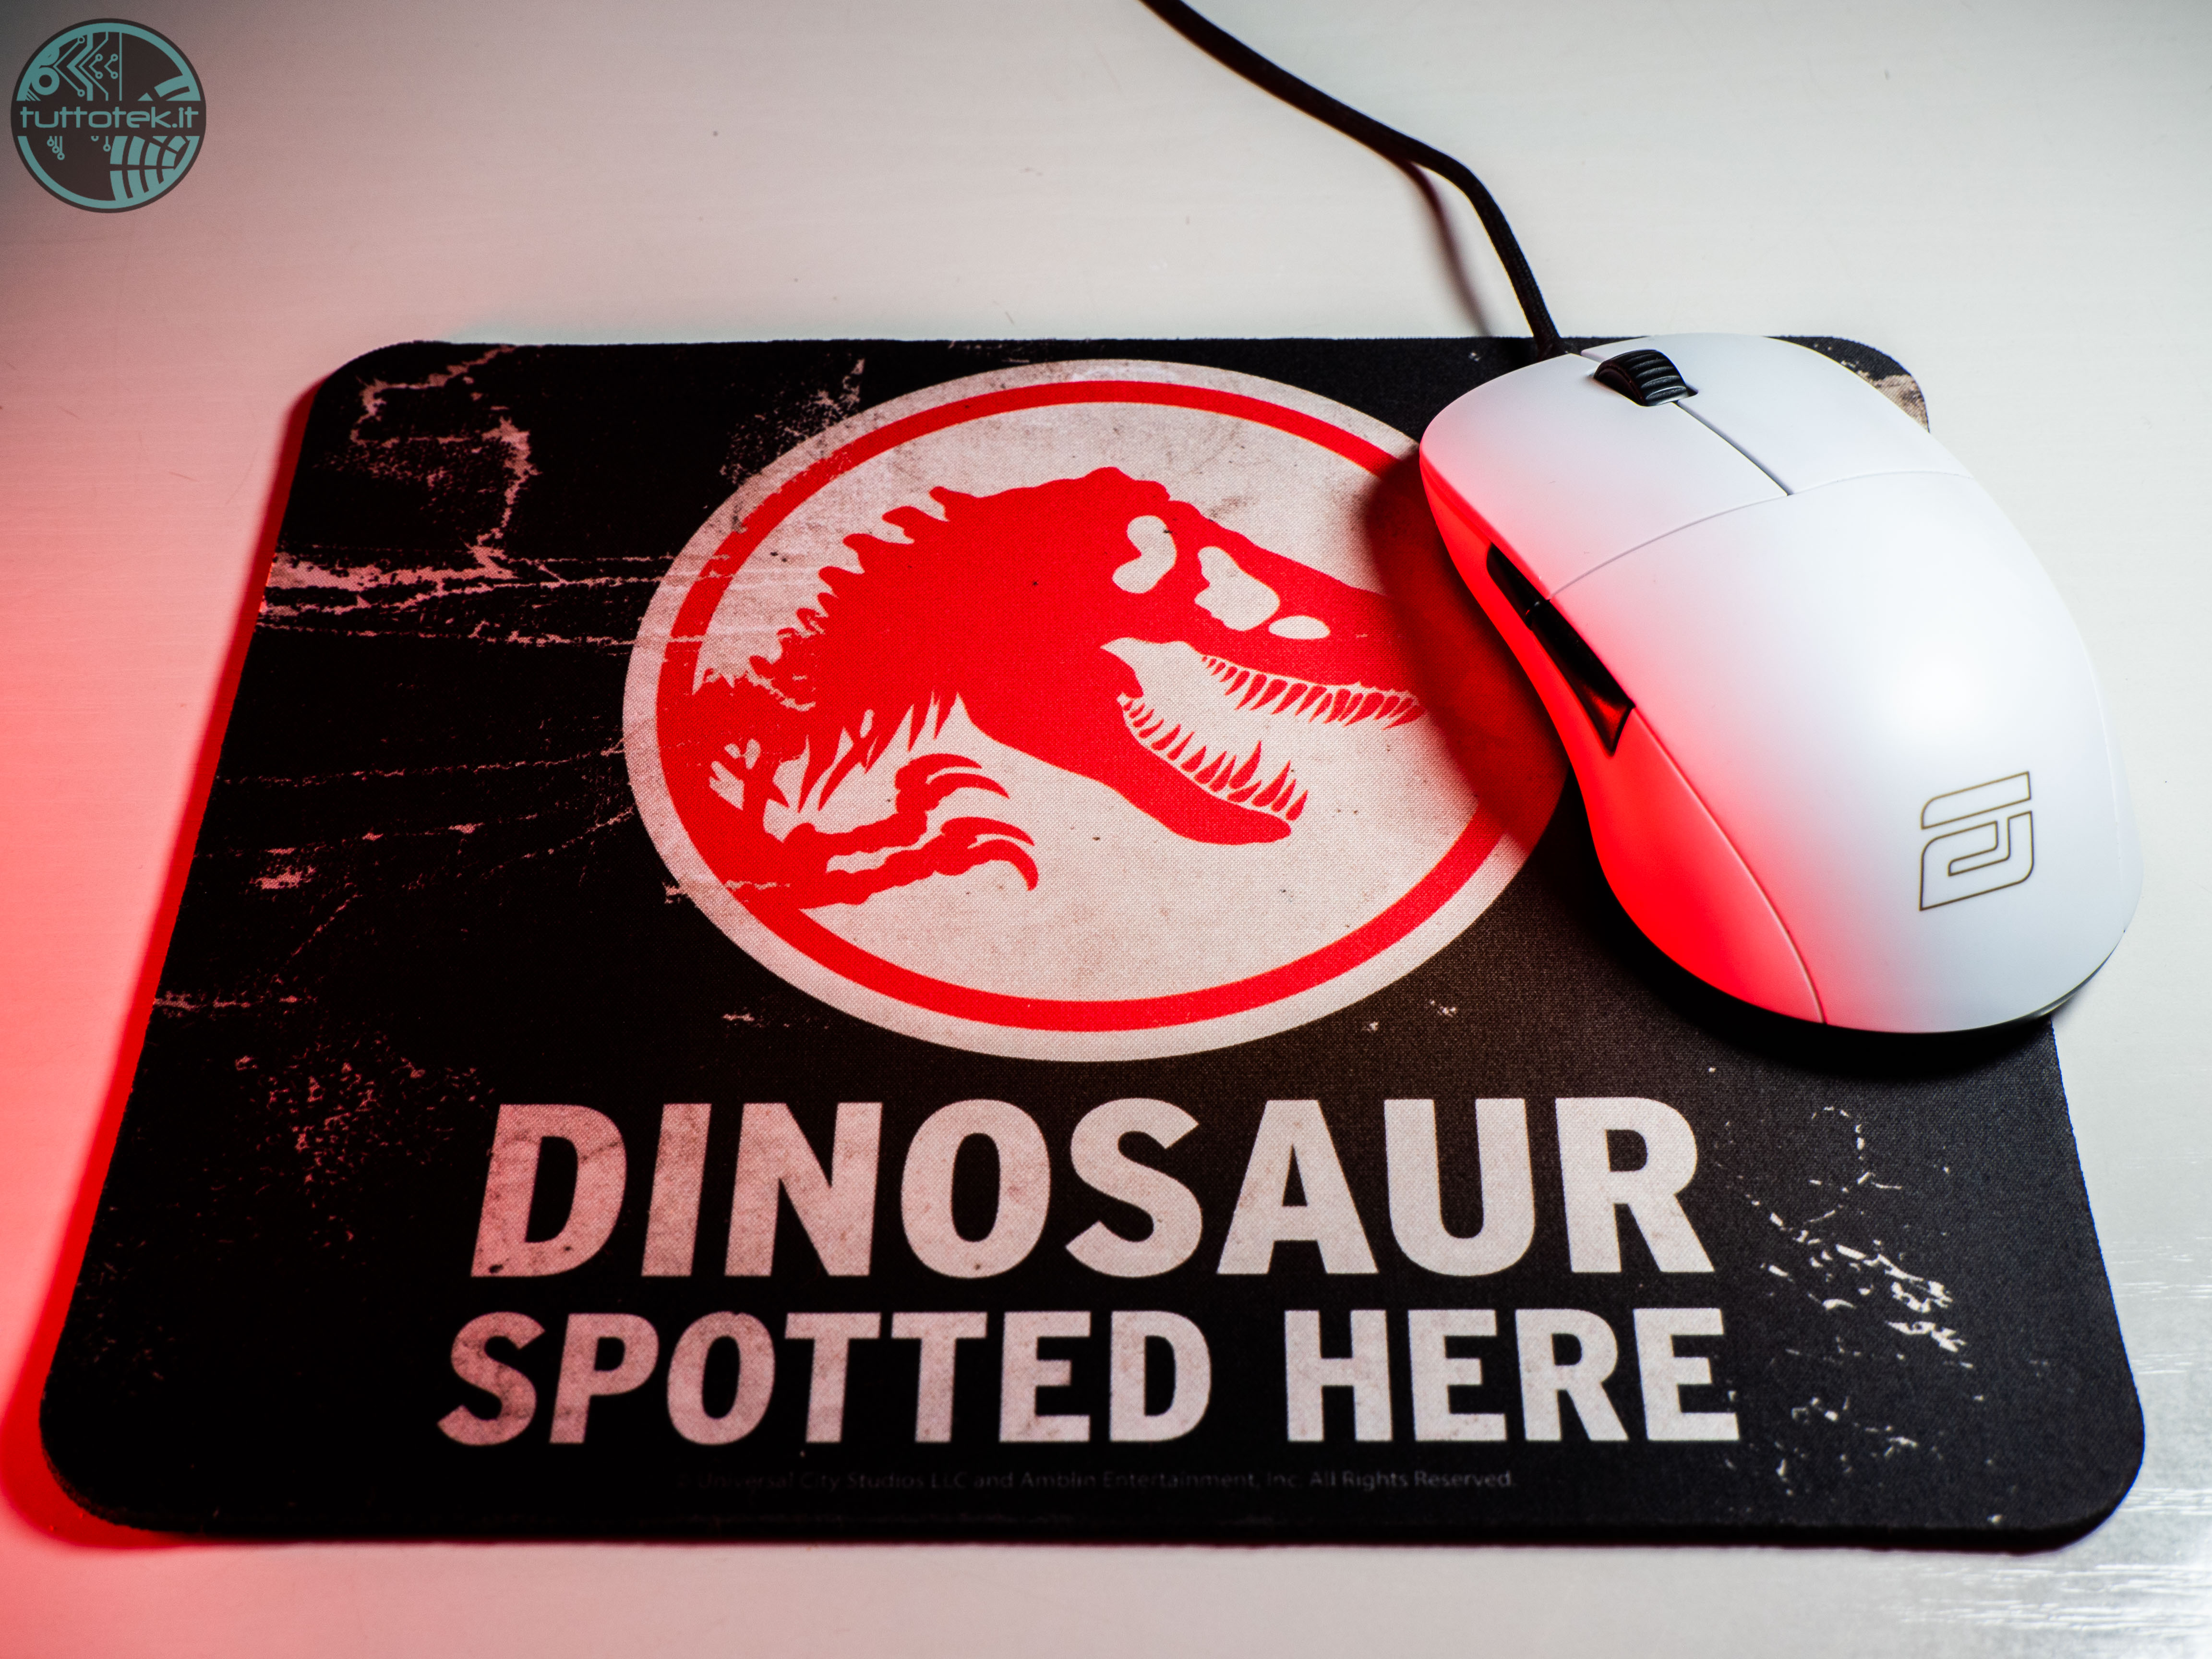 Jurassic World: here are 5 gadgets for fans of the saga